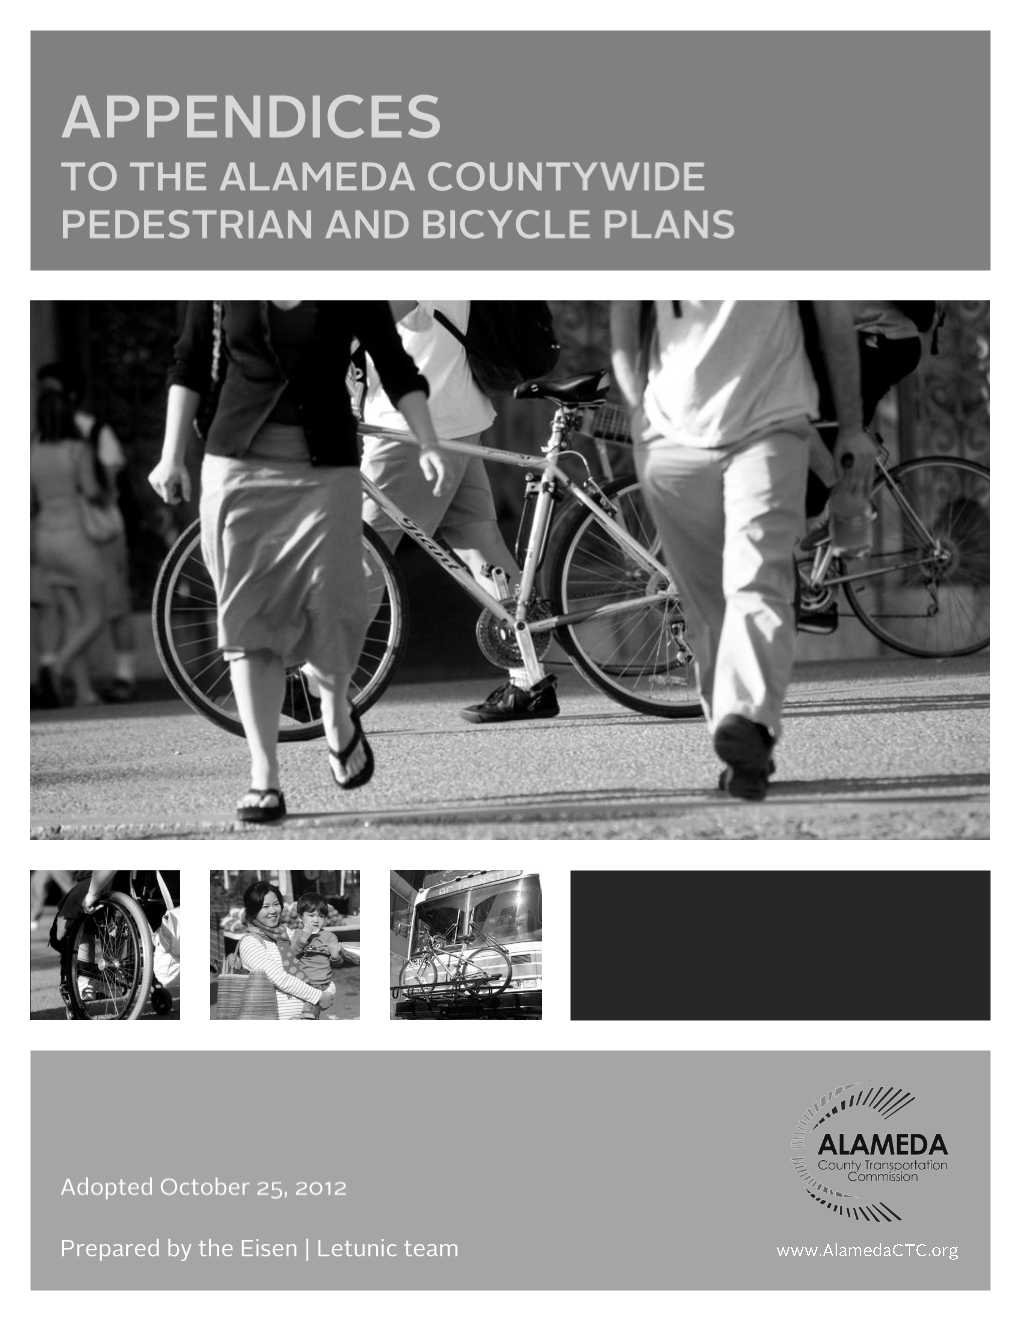 Appendices to the Alameda Countywide Pedestrian and Bicycle